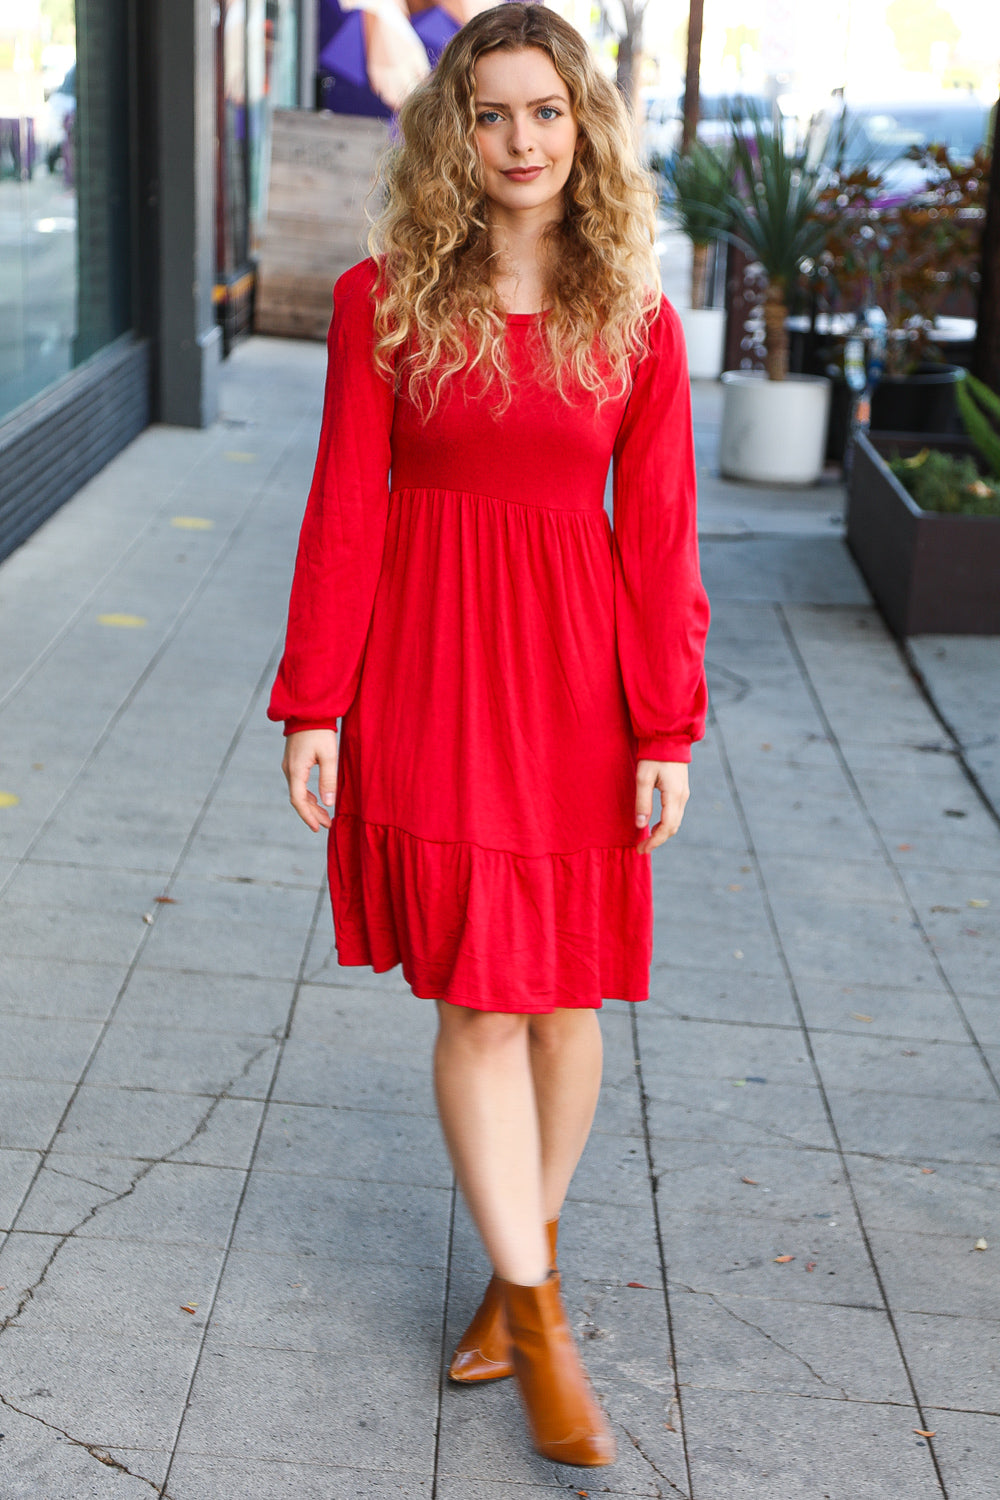 Lady In Red Hacci Fit & Flare Ruffle Dress